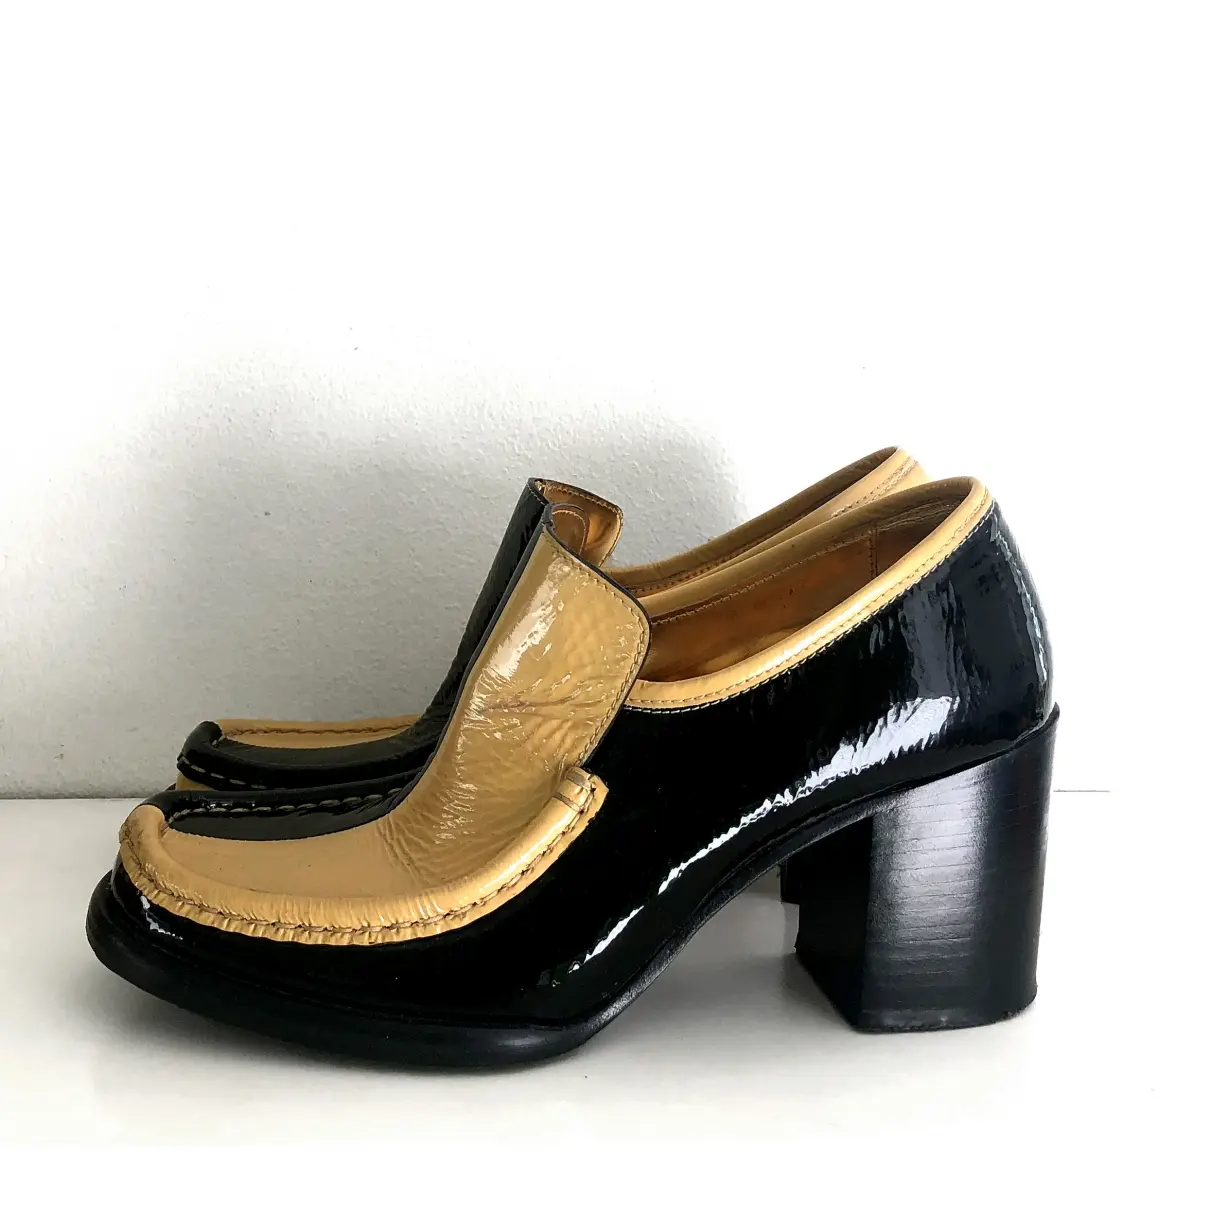 Acne Studios Patent leather heels for sale